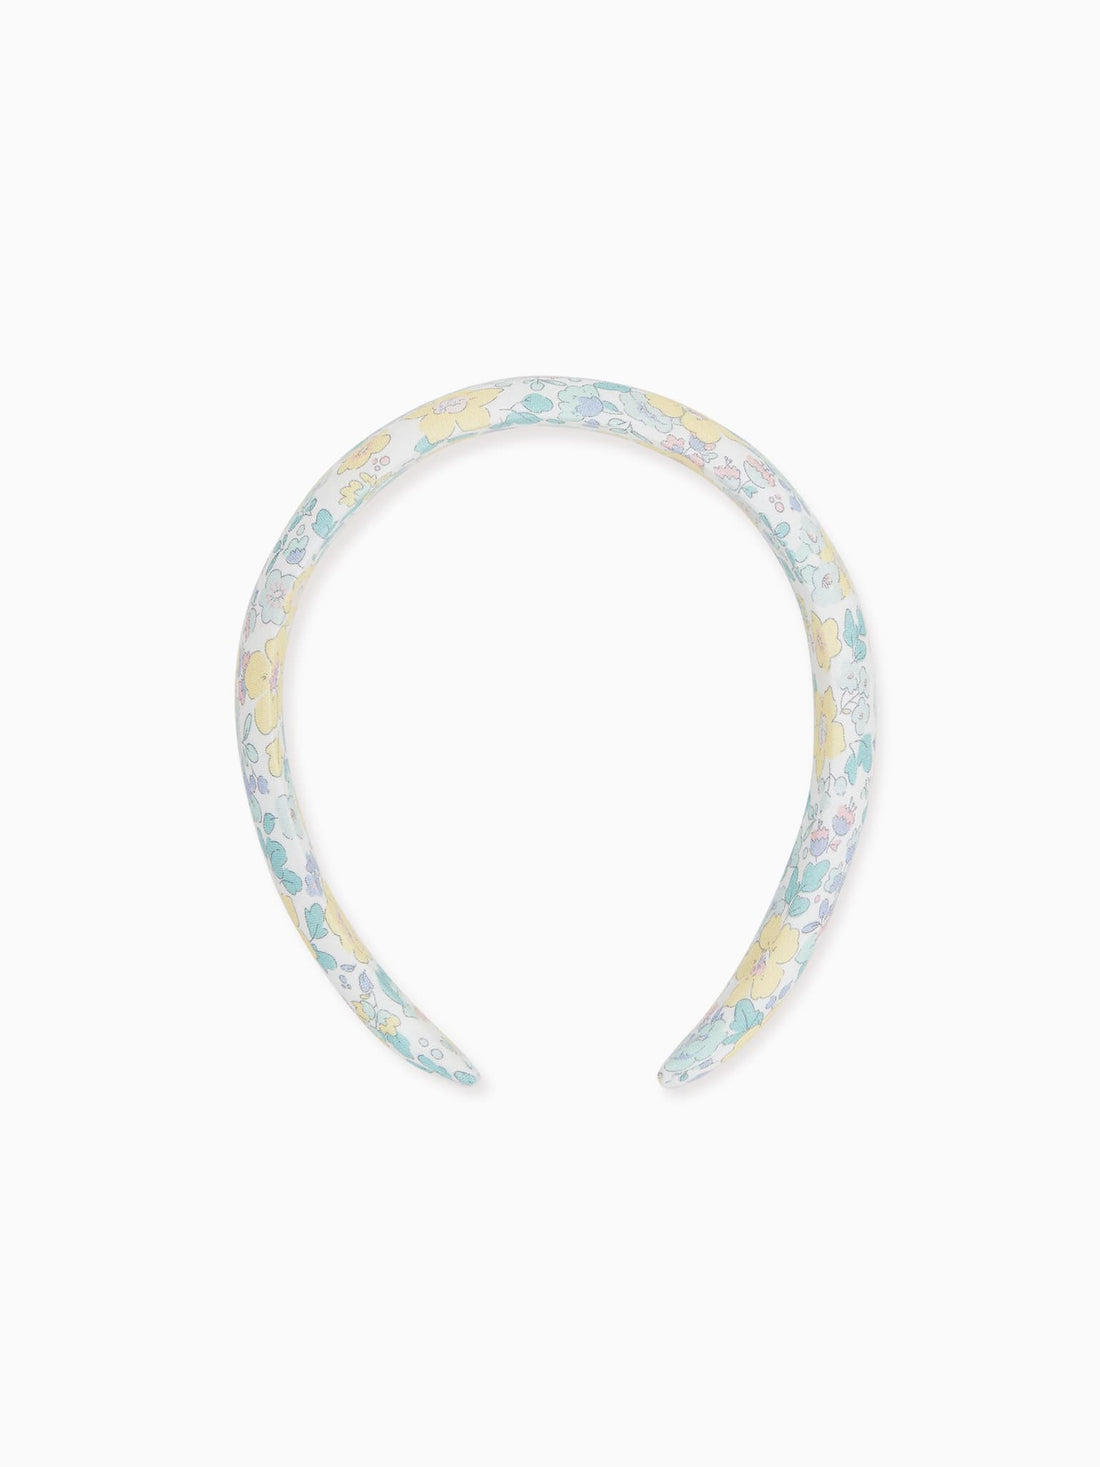 wide headband yellow floral